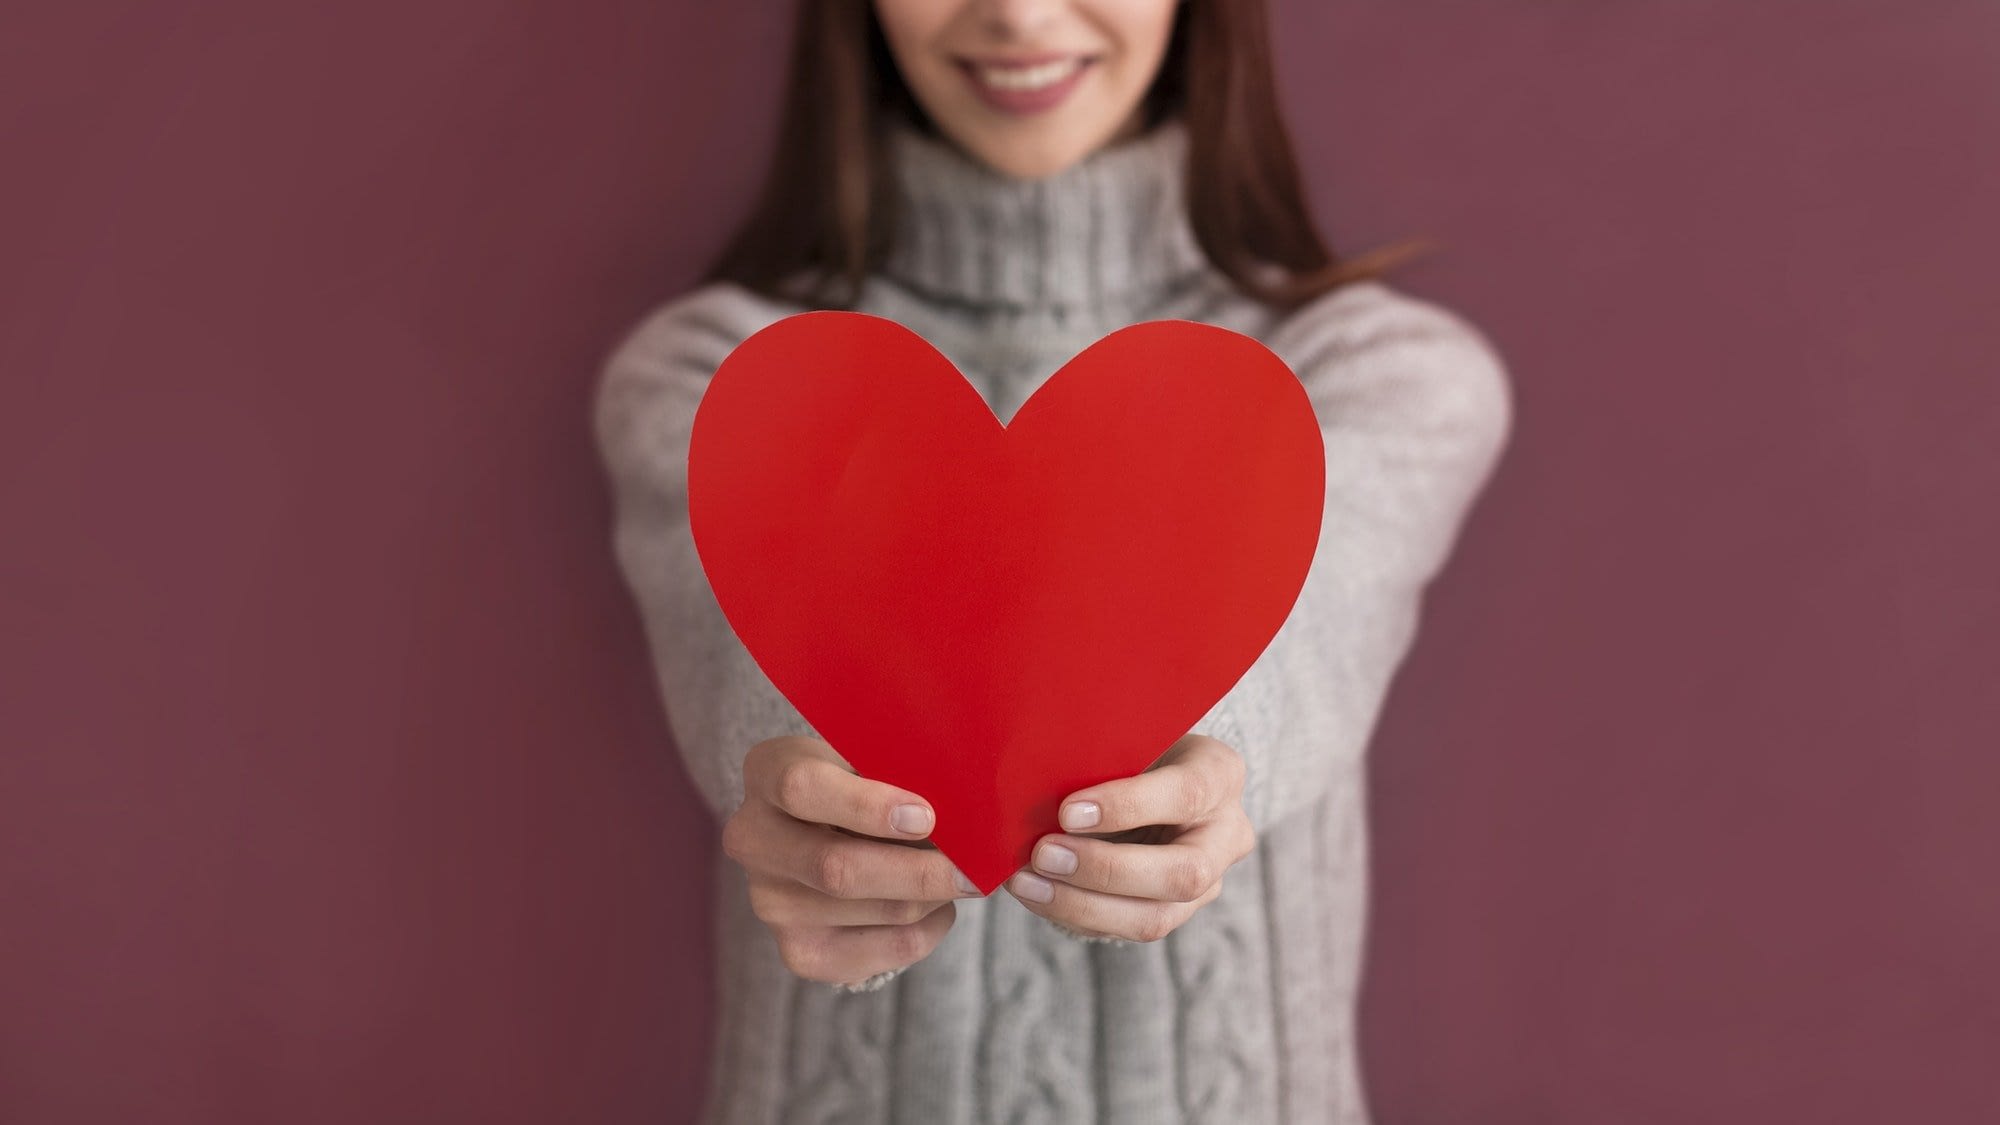 Cropped view of caucasian girl holding heart shaped card